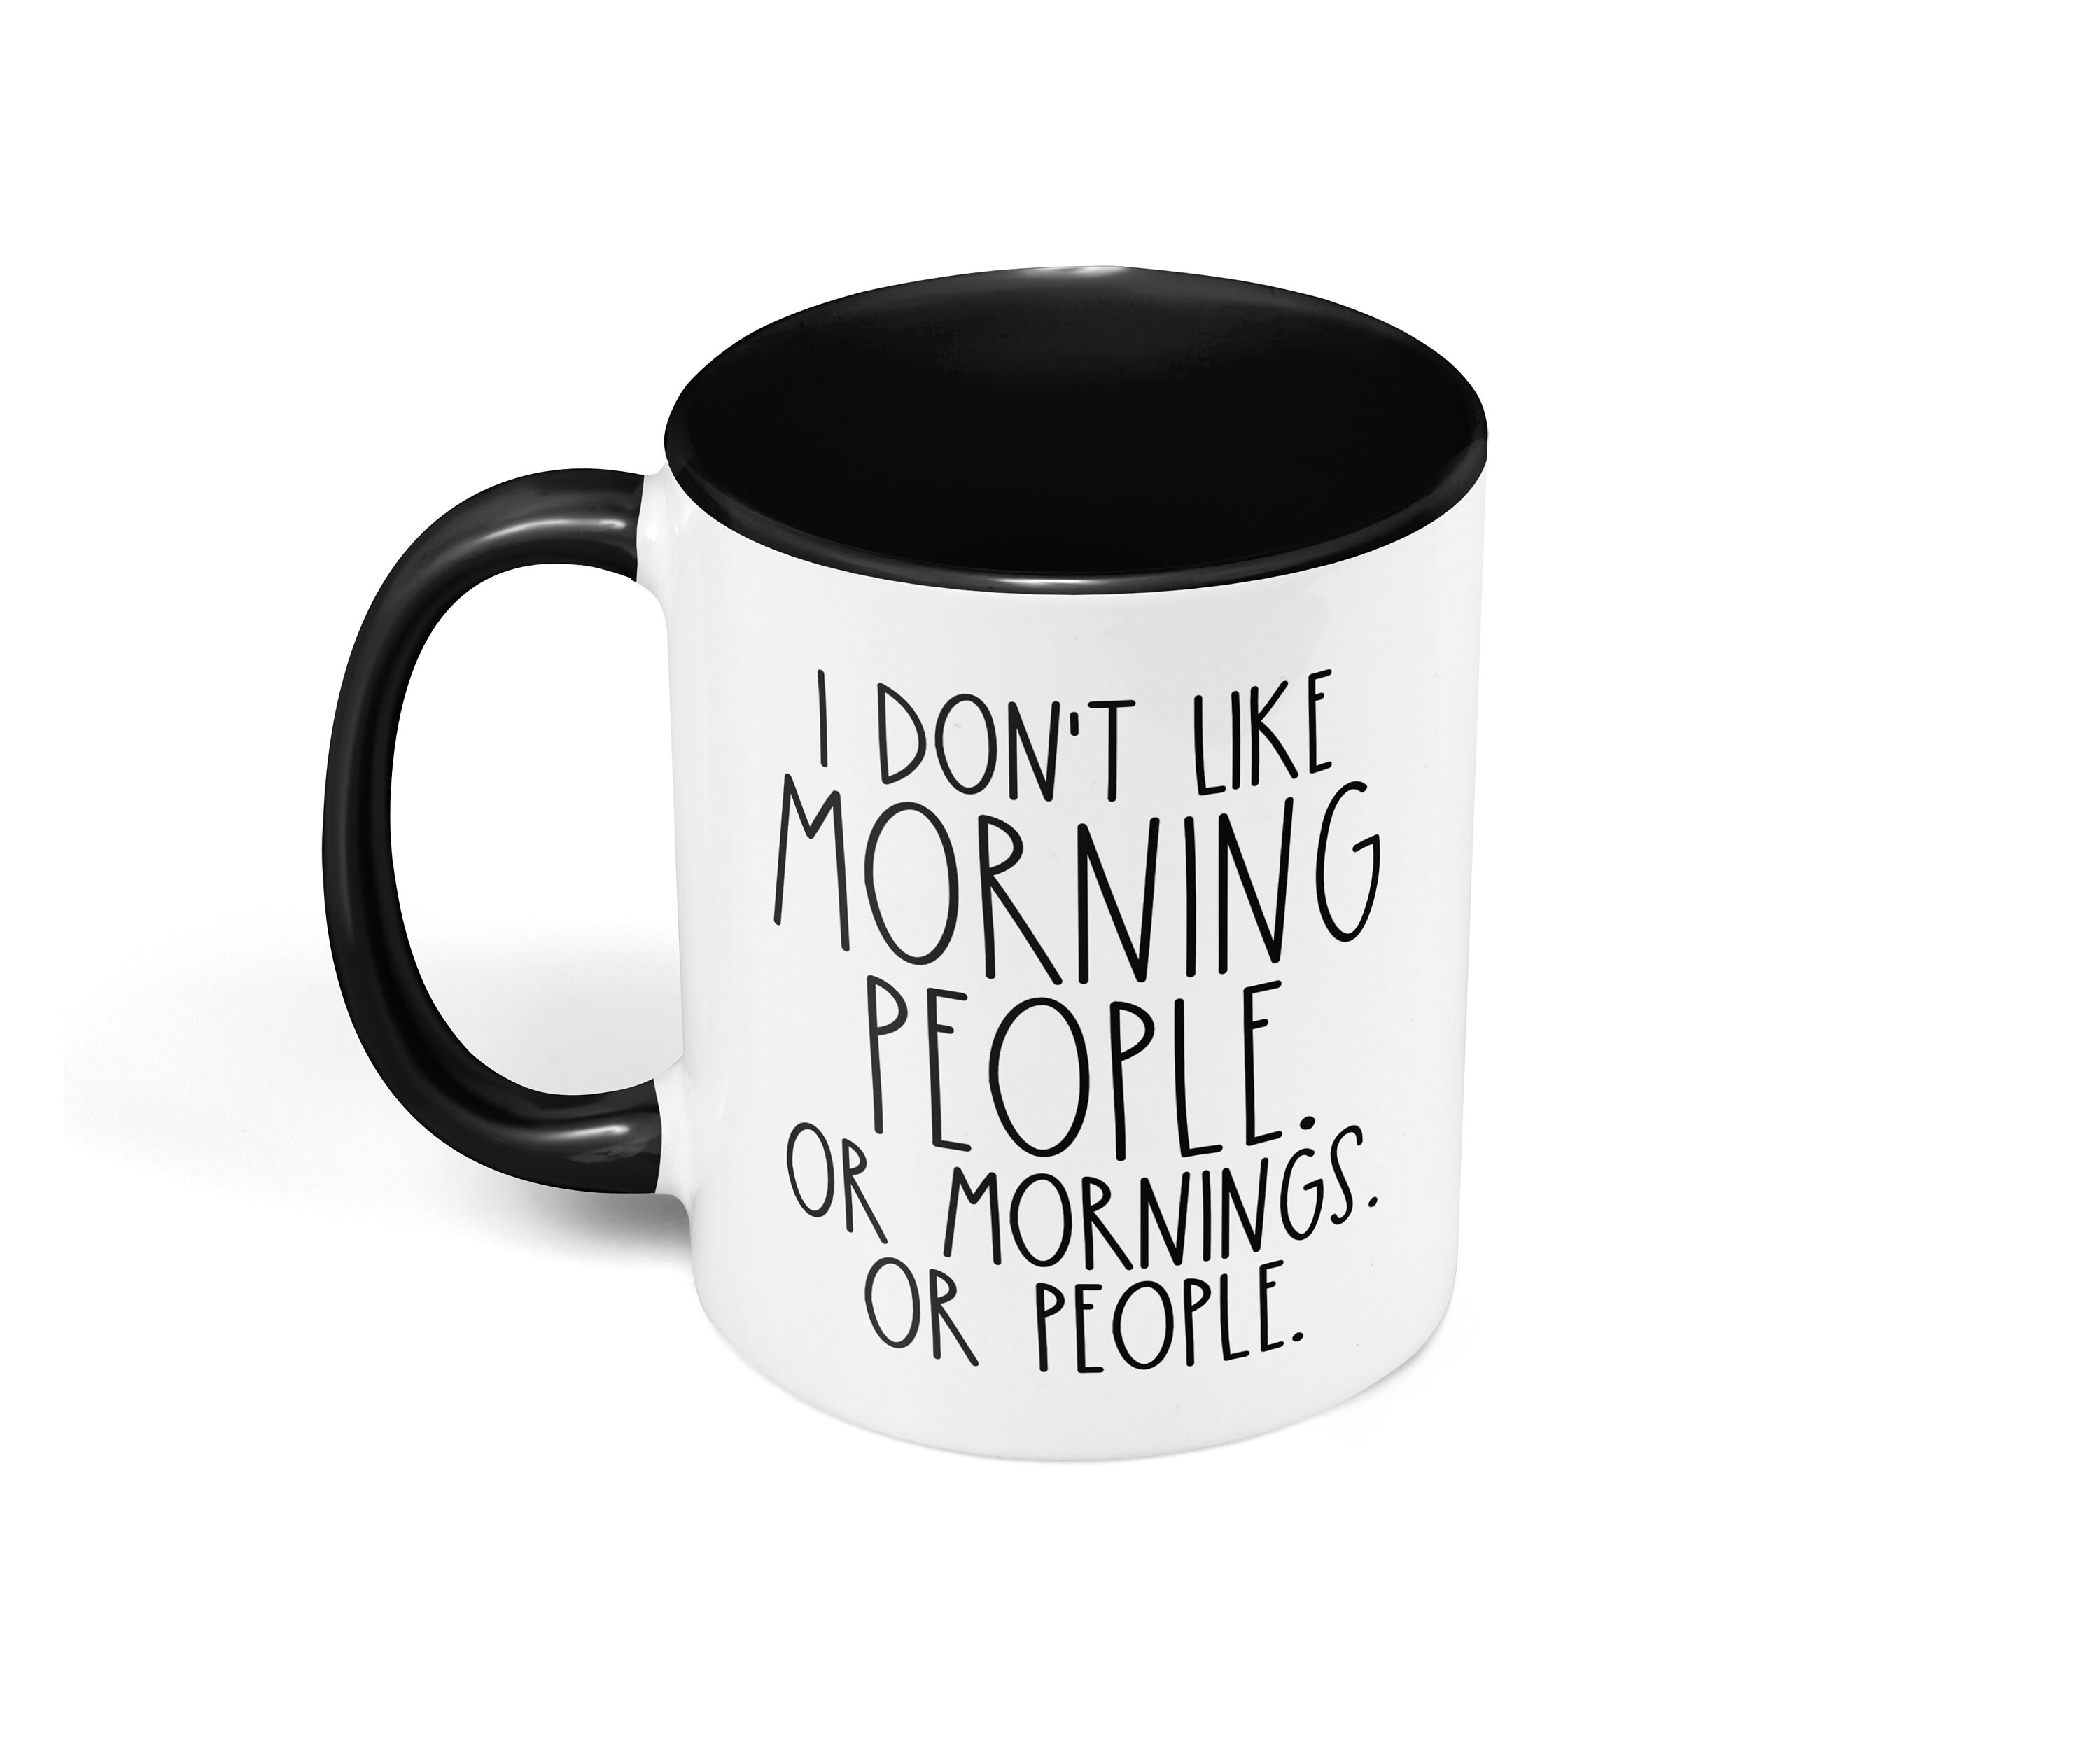 Details about   I Don't Like Morning People or Mornings or People Stainless Travel Mug 15oz 